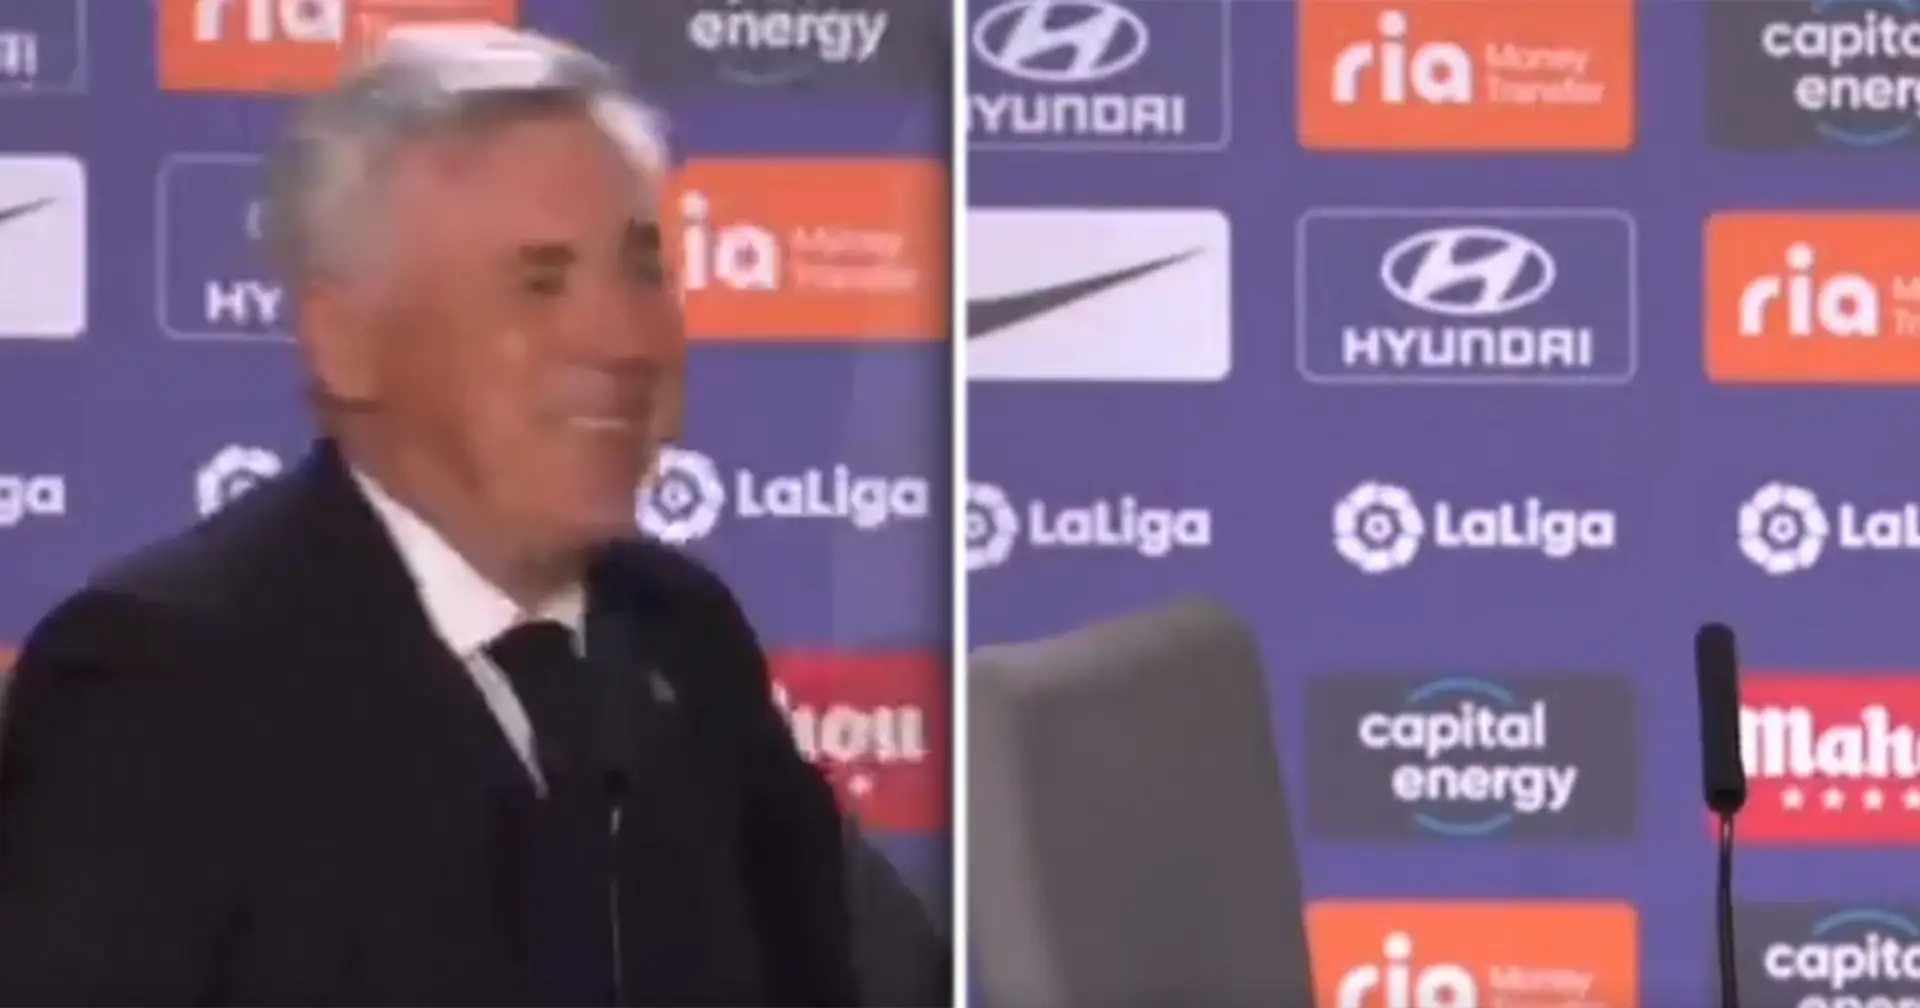 'We don't speak about it, right?': Ancelotti ends Atletico presser with epic rhetorical question for journalists